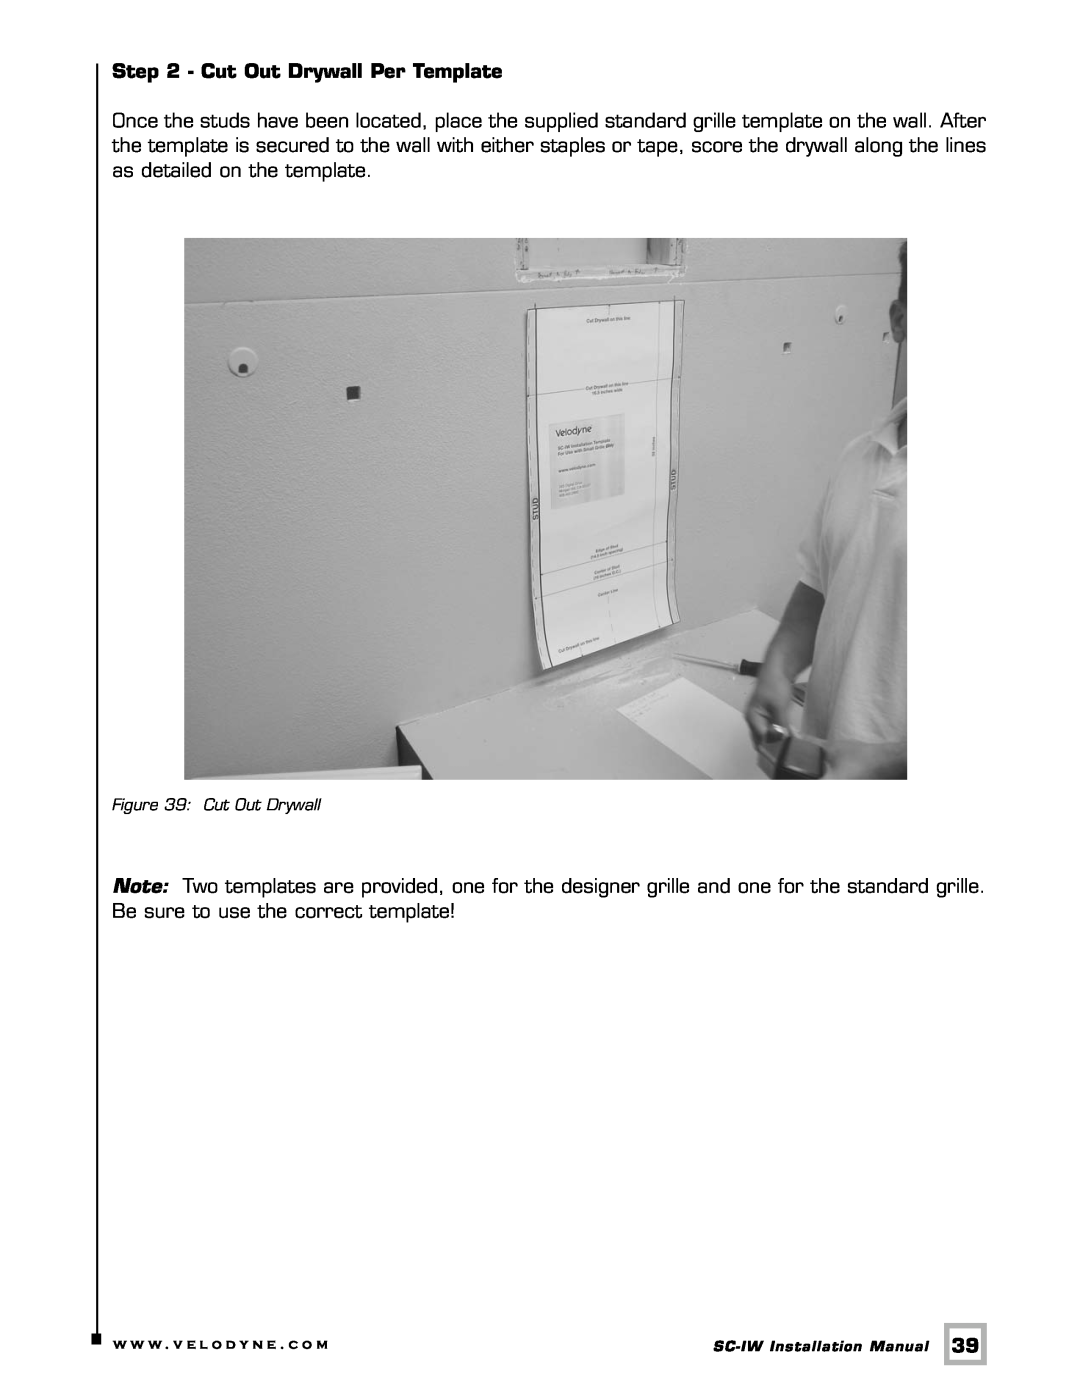 Velodyne Acoustics SC-IW installation manual Cut Out Drywall Per Template 